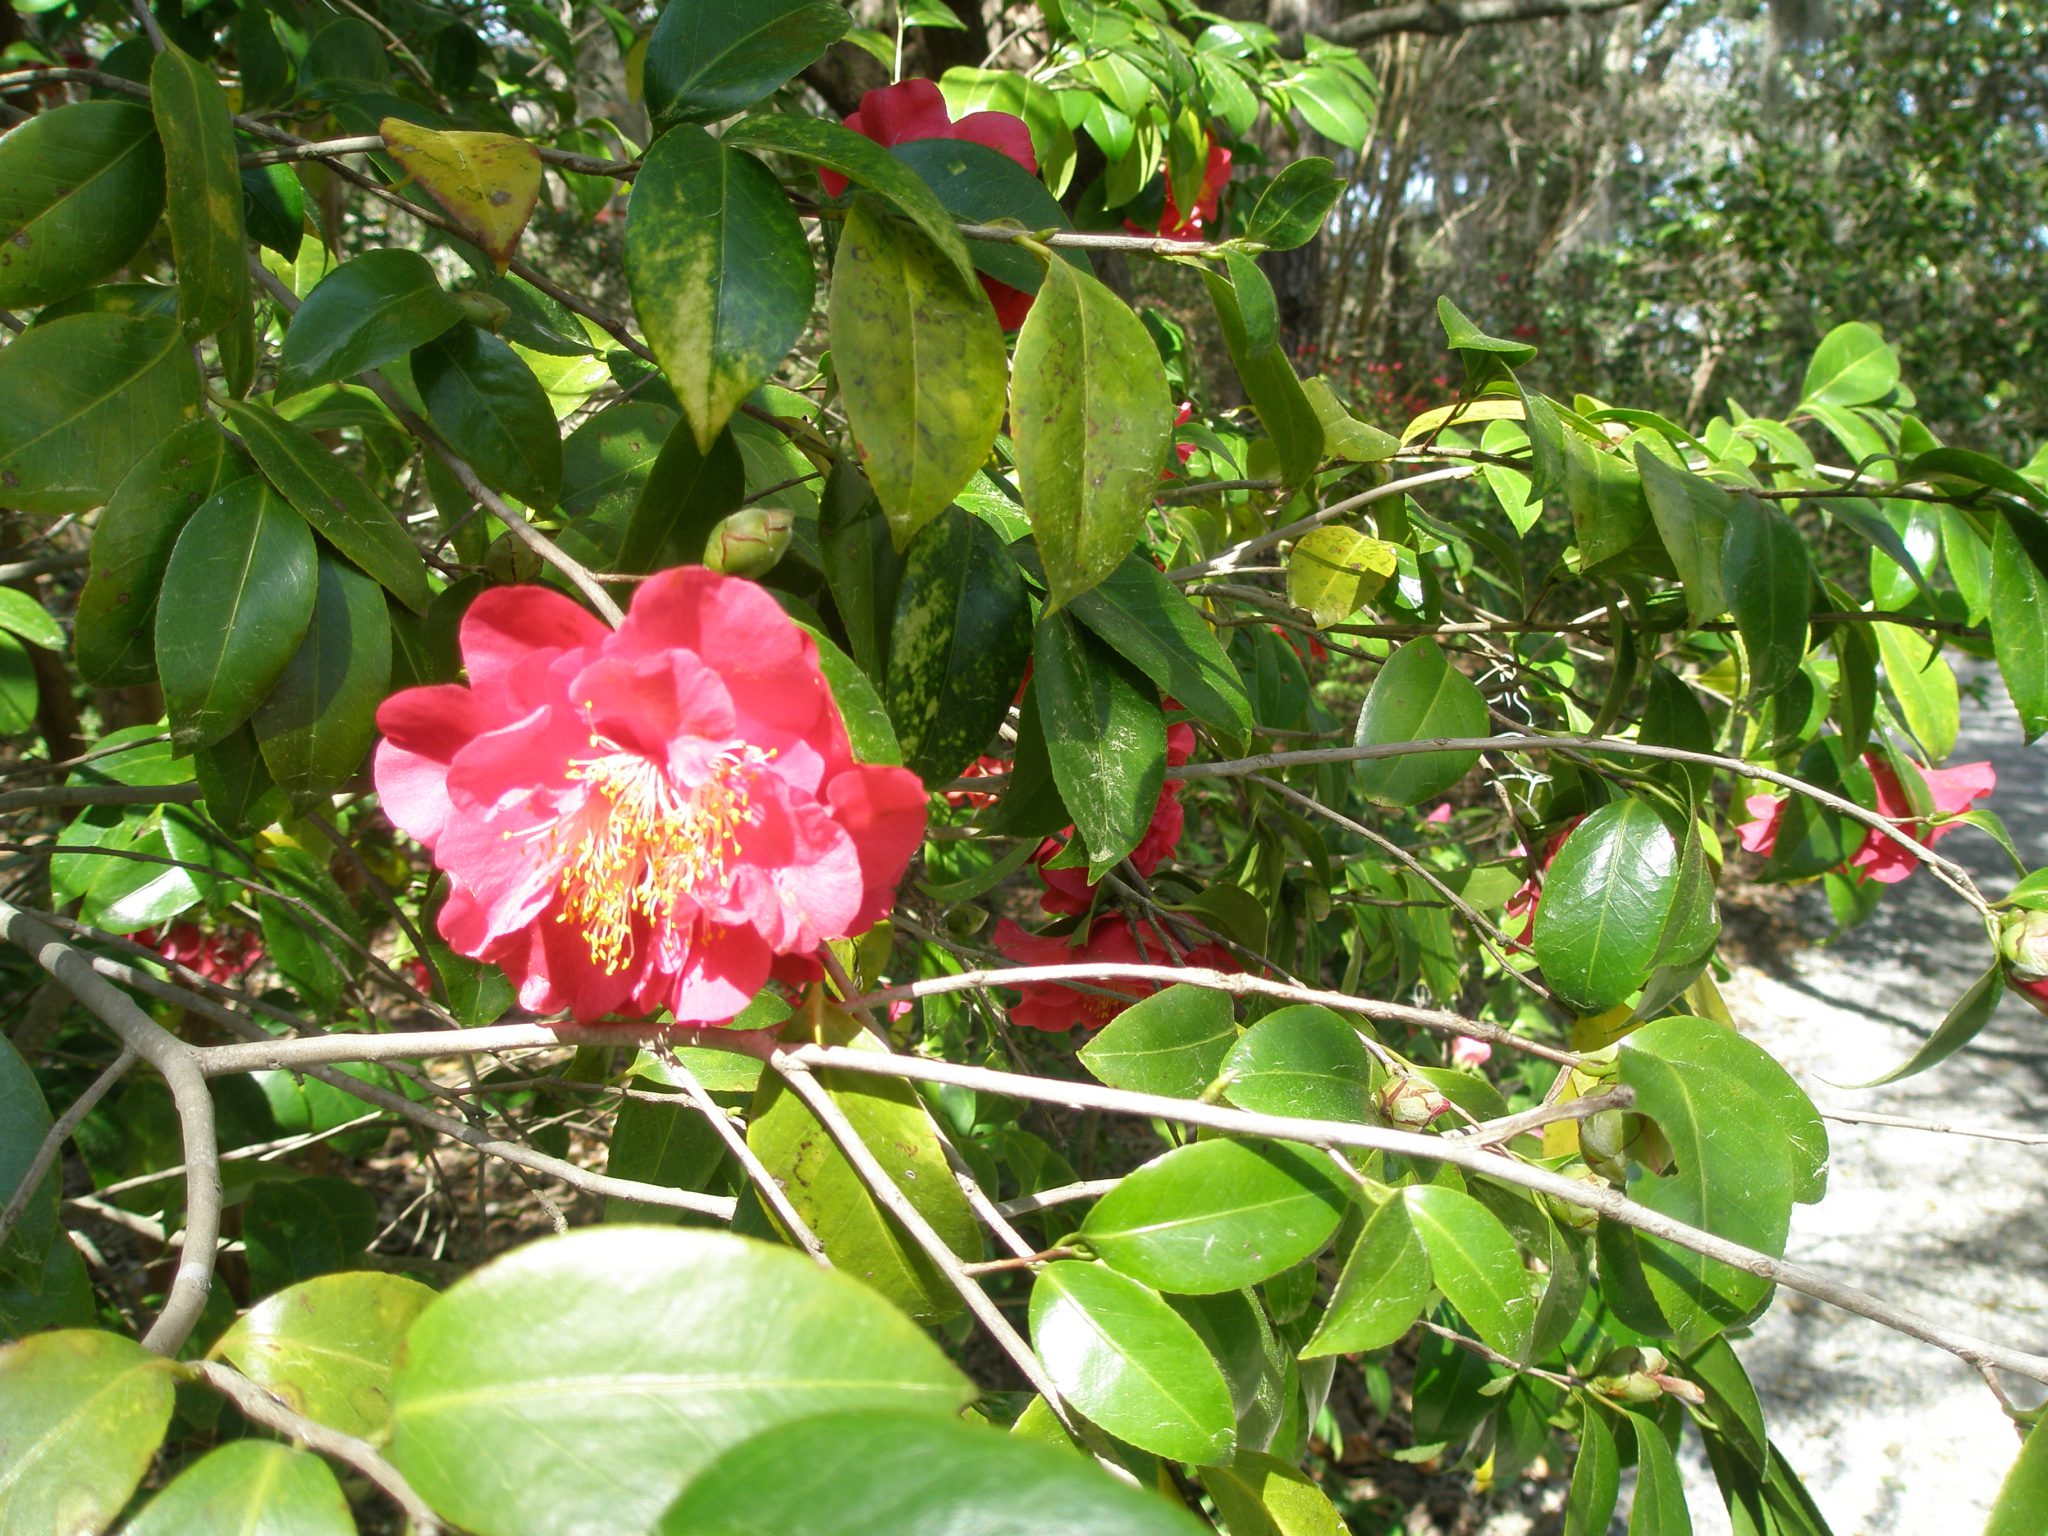 Springtime is when the camellias bloom